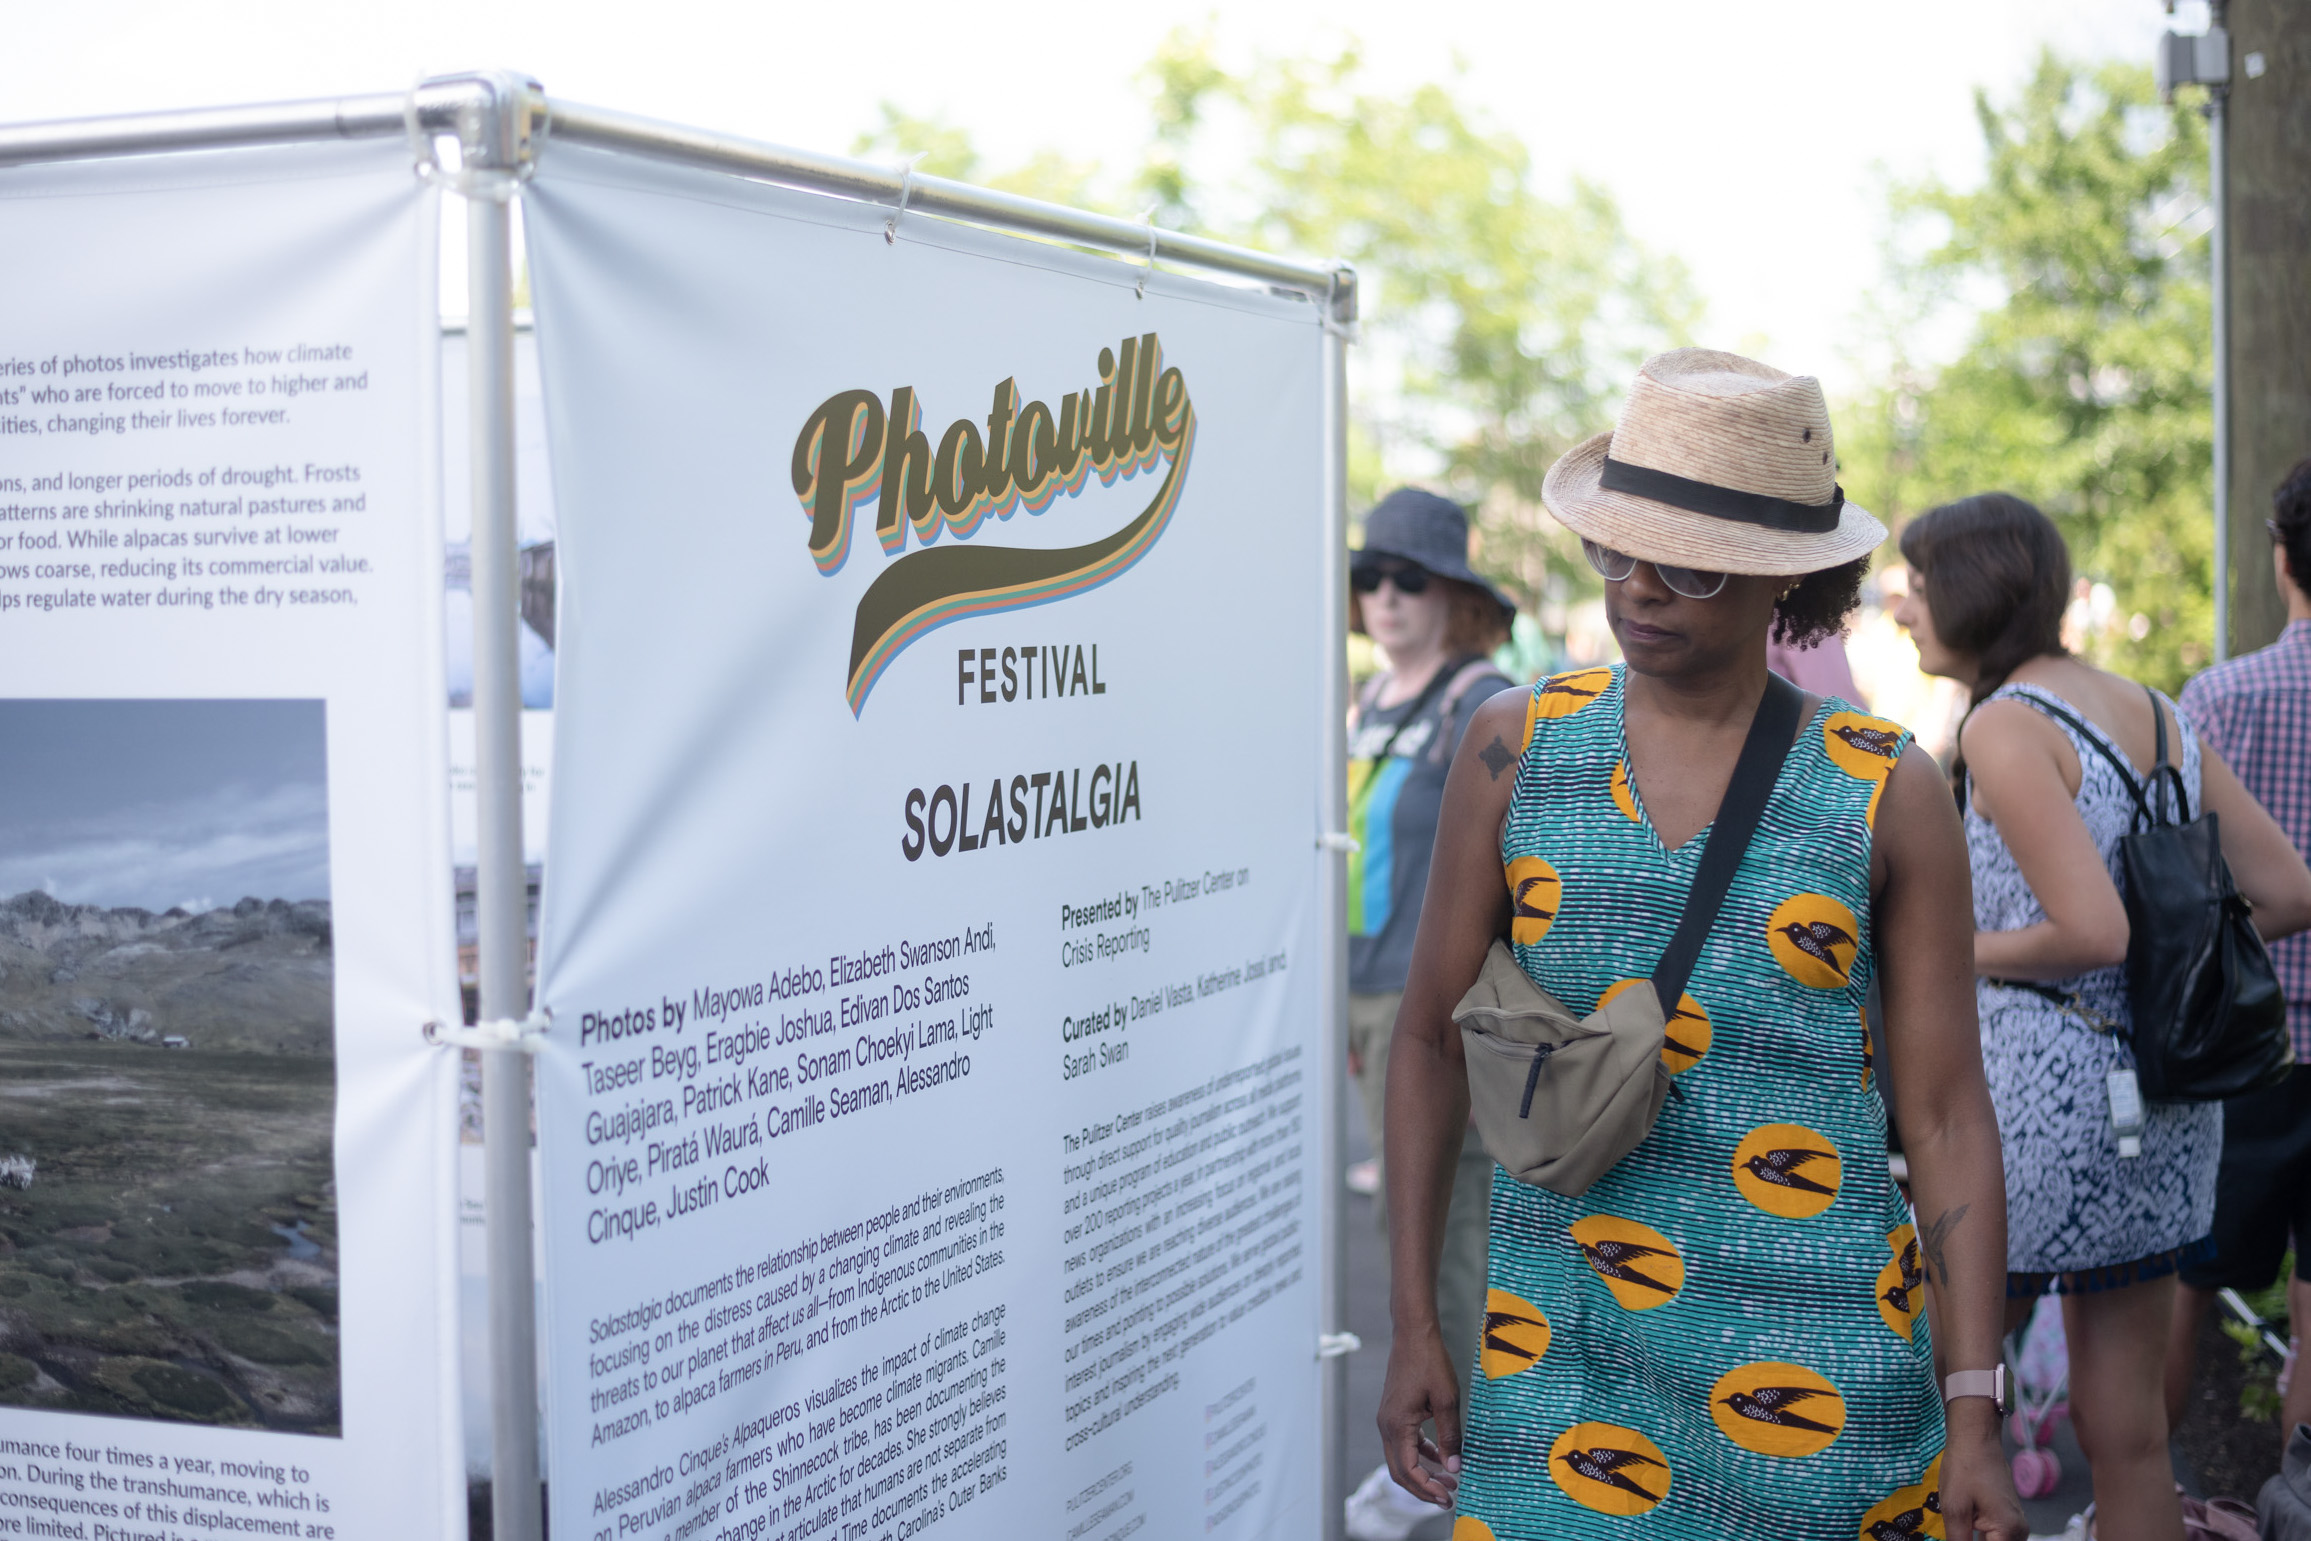 A woman in a sunhat and dress reads a Photoville poster